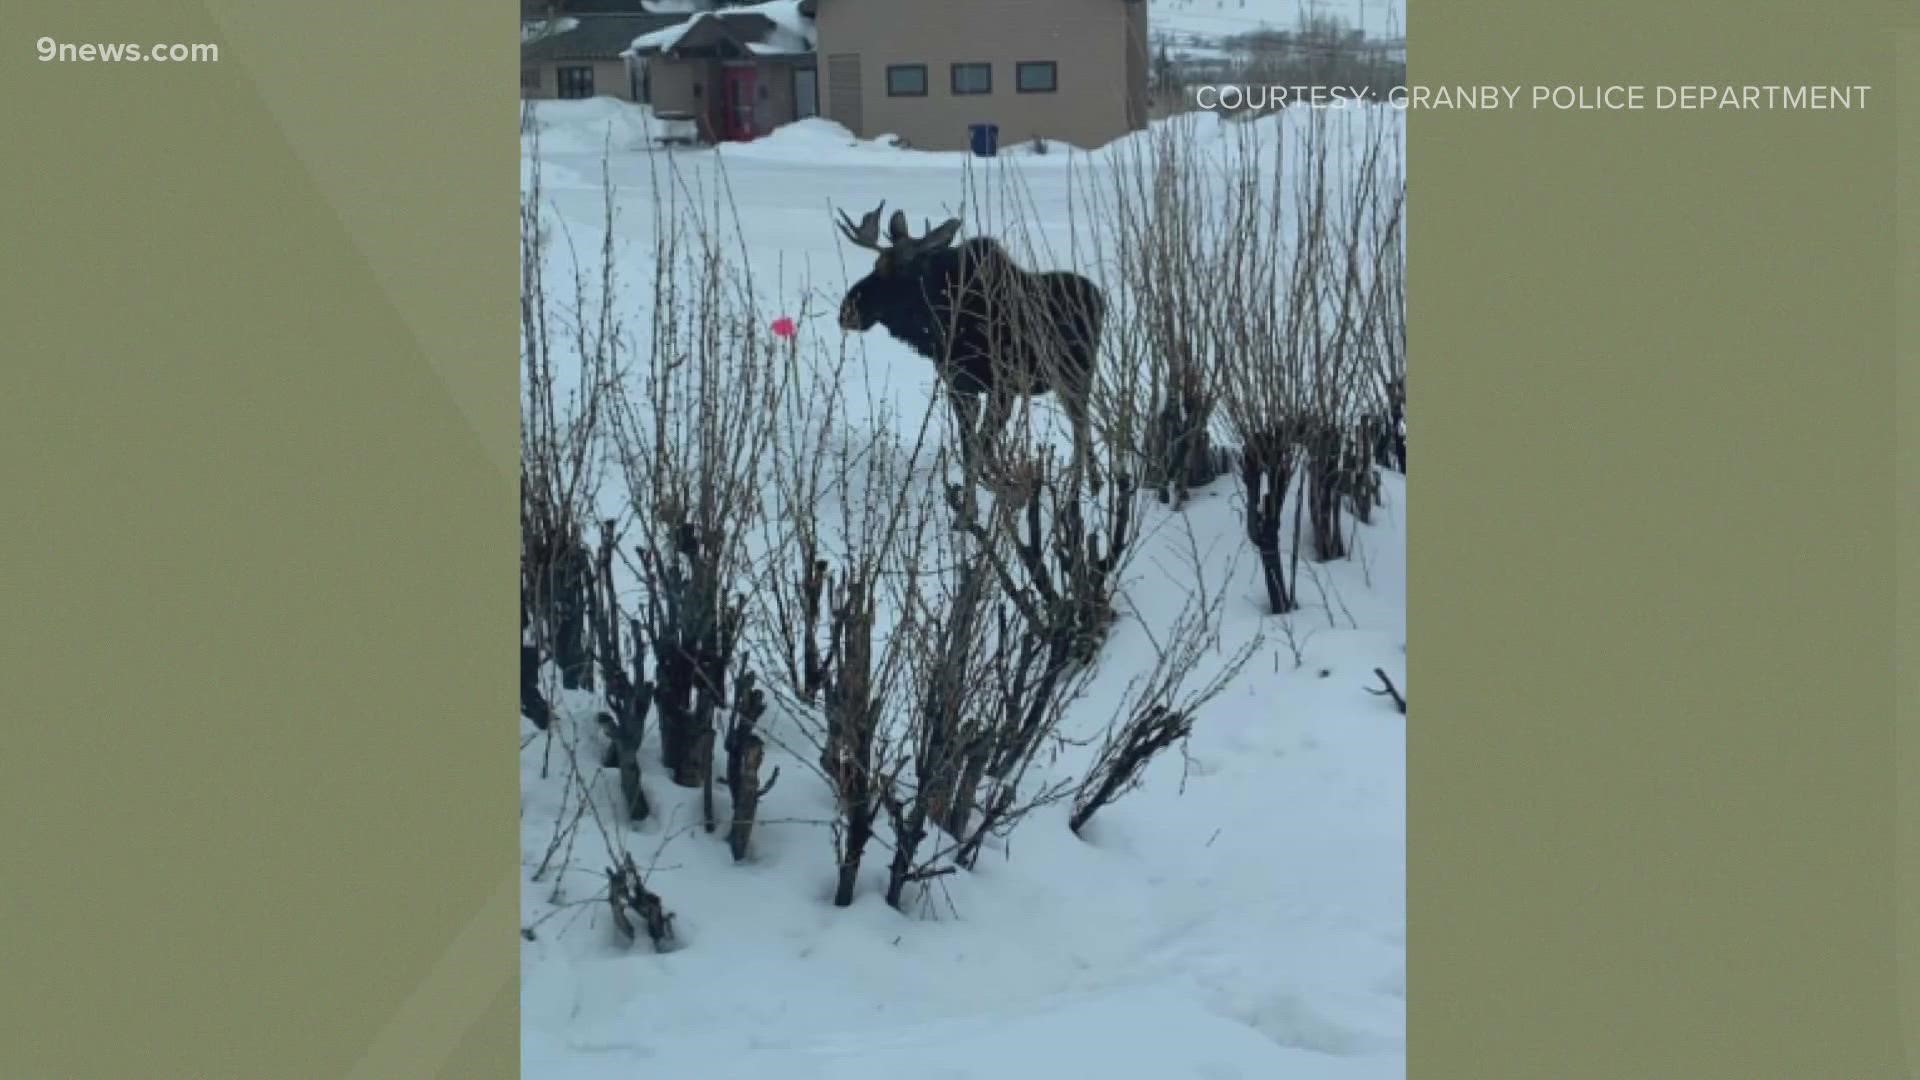 People tried to approach and take pictures of the moose, causing them to separate and get stressed, the town said.